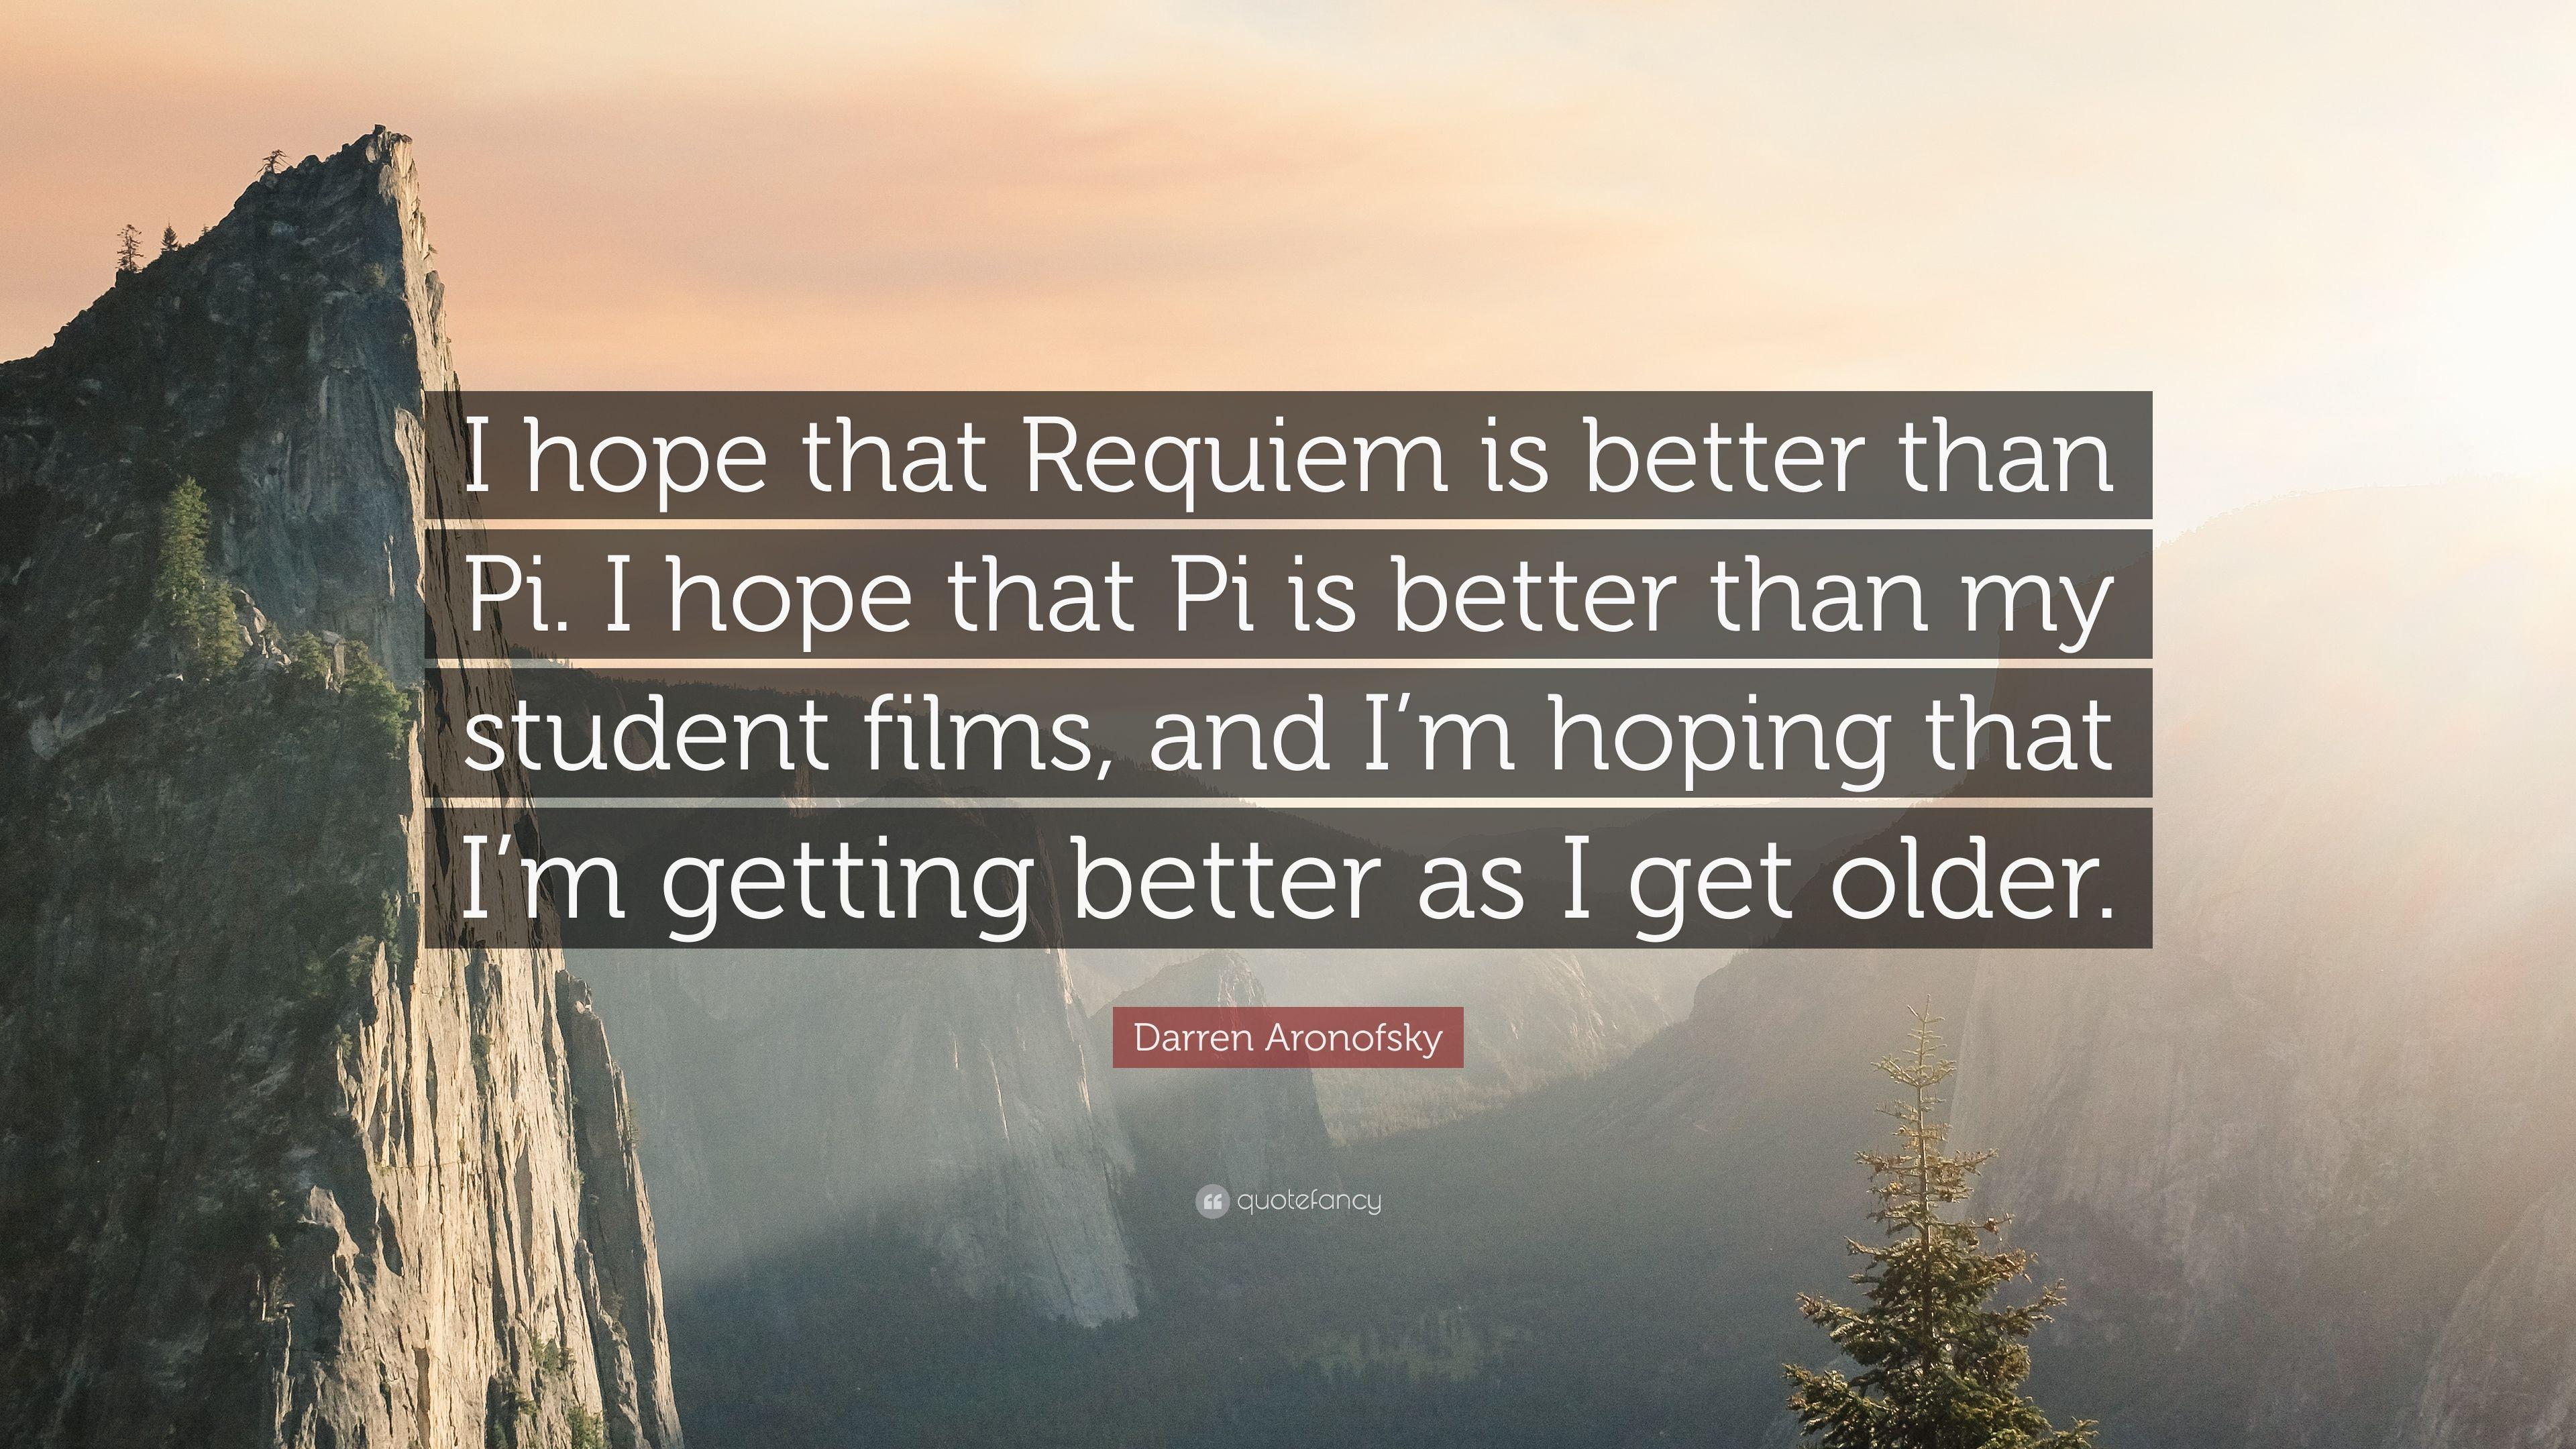 Darren Aronofsky Quote: “I hope that Requiem is better than Pi. I